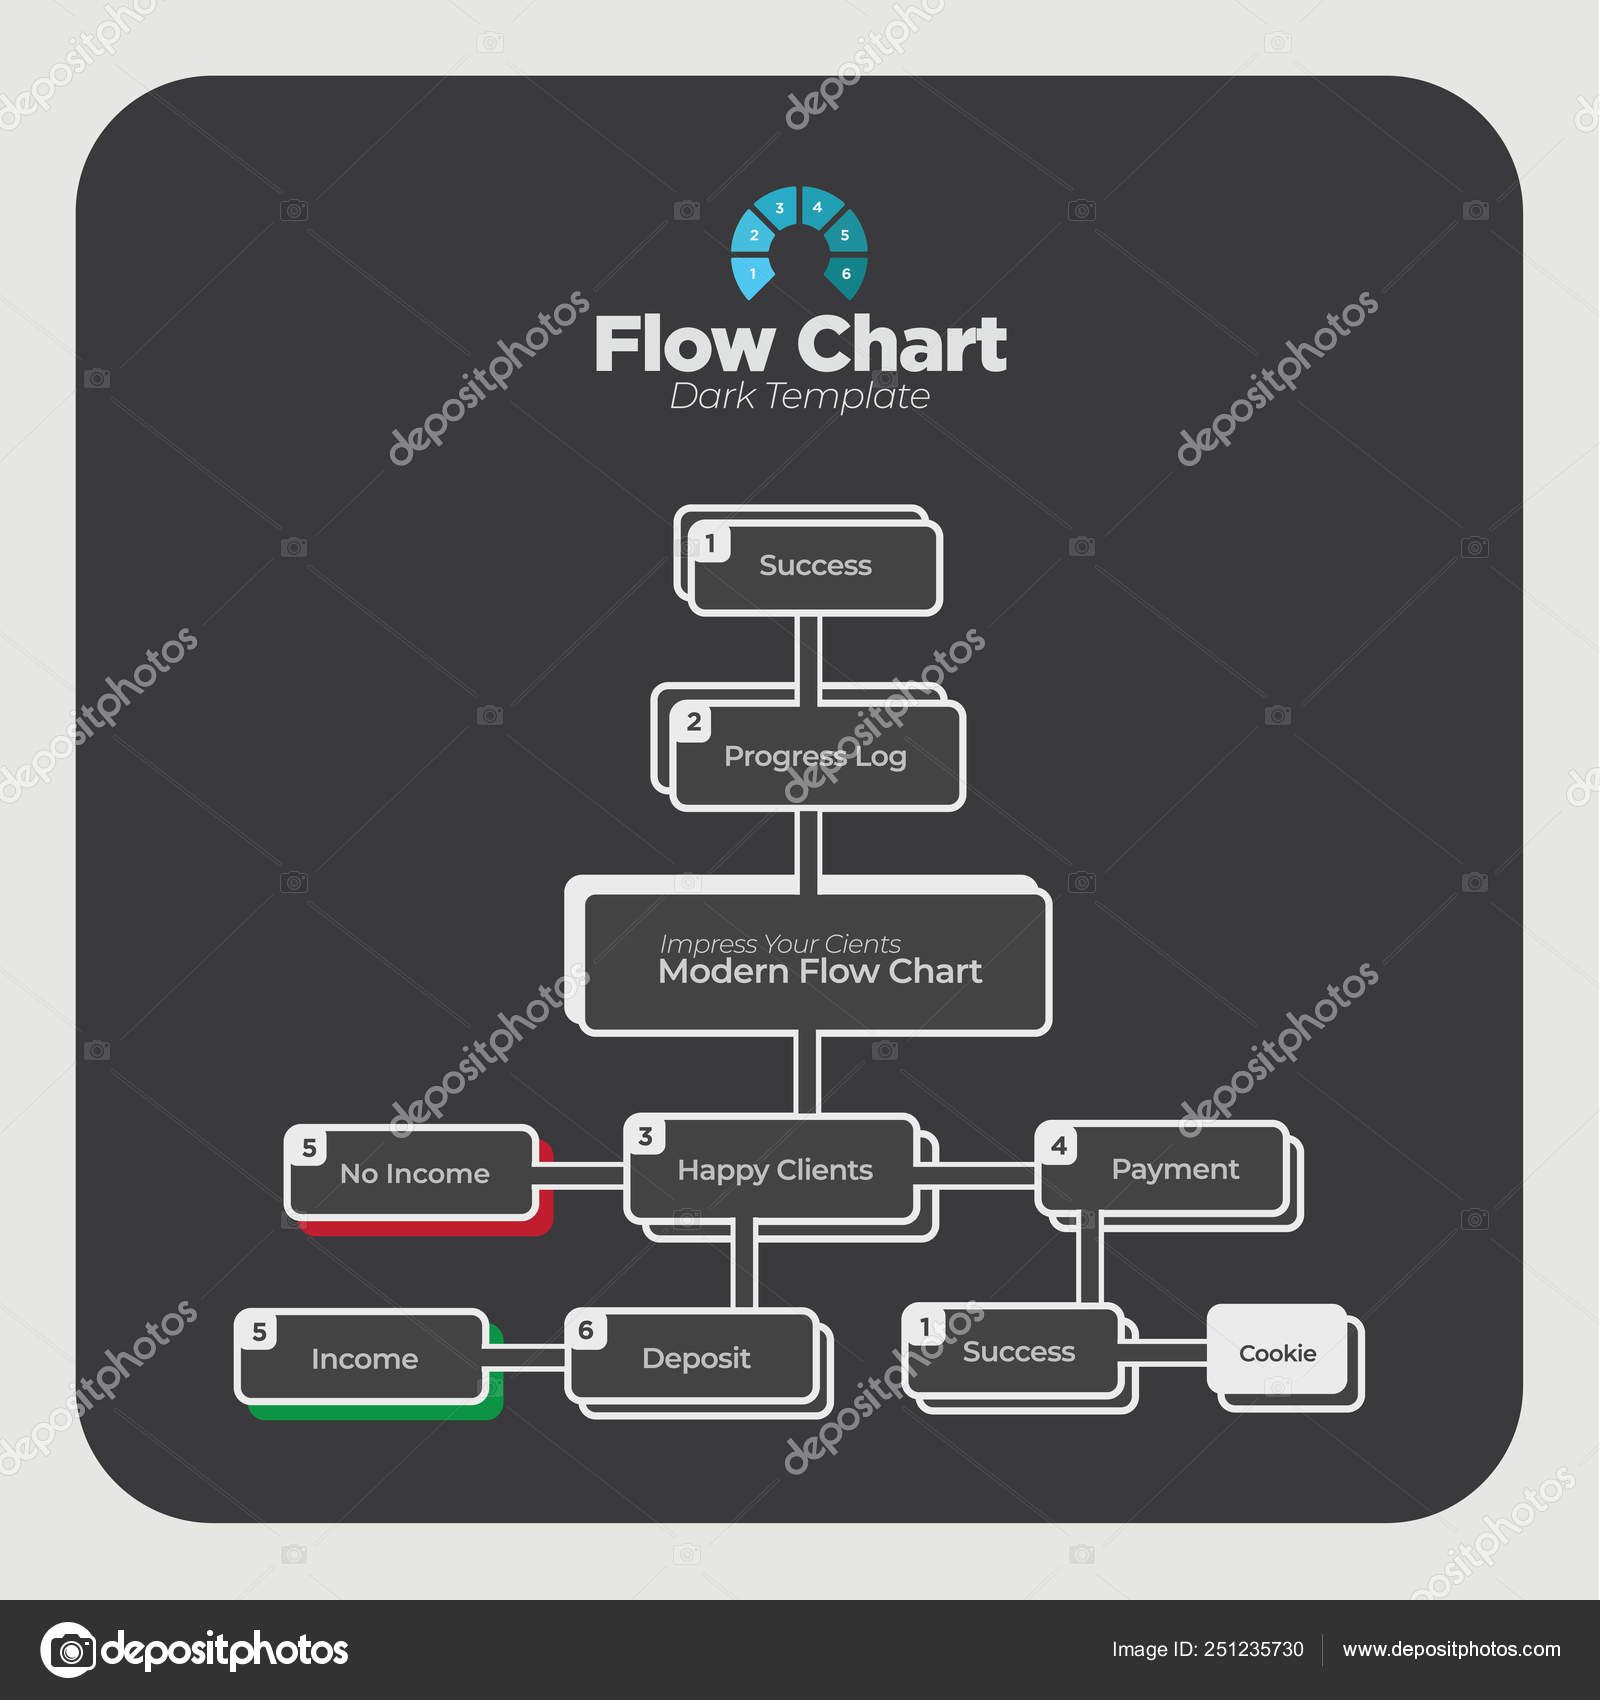 Create Your Own Flow Chart